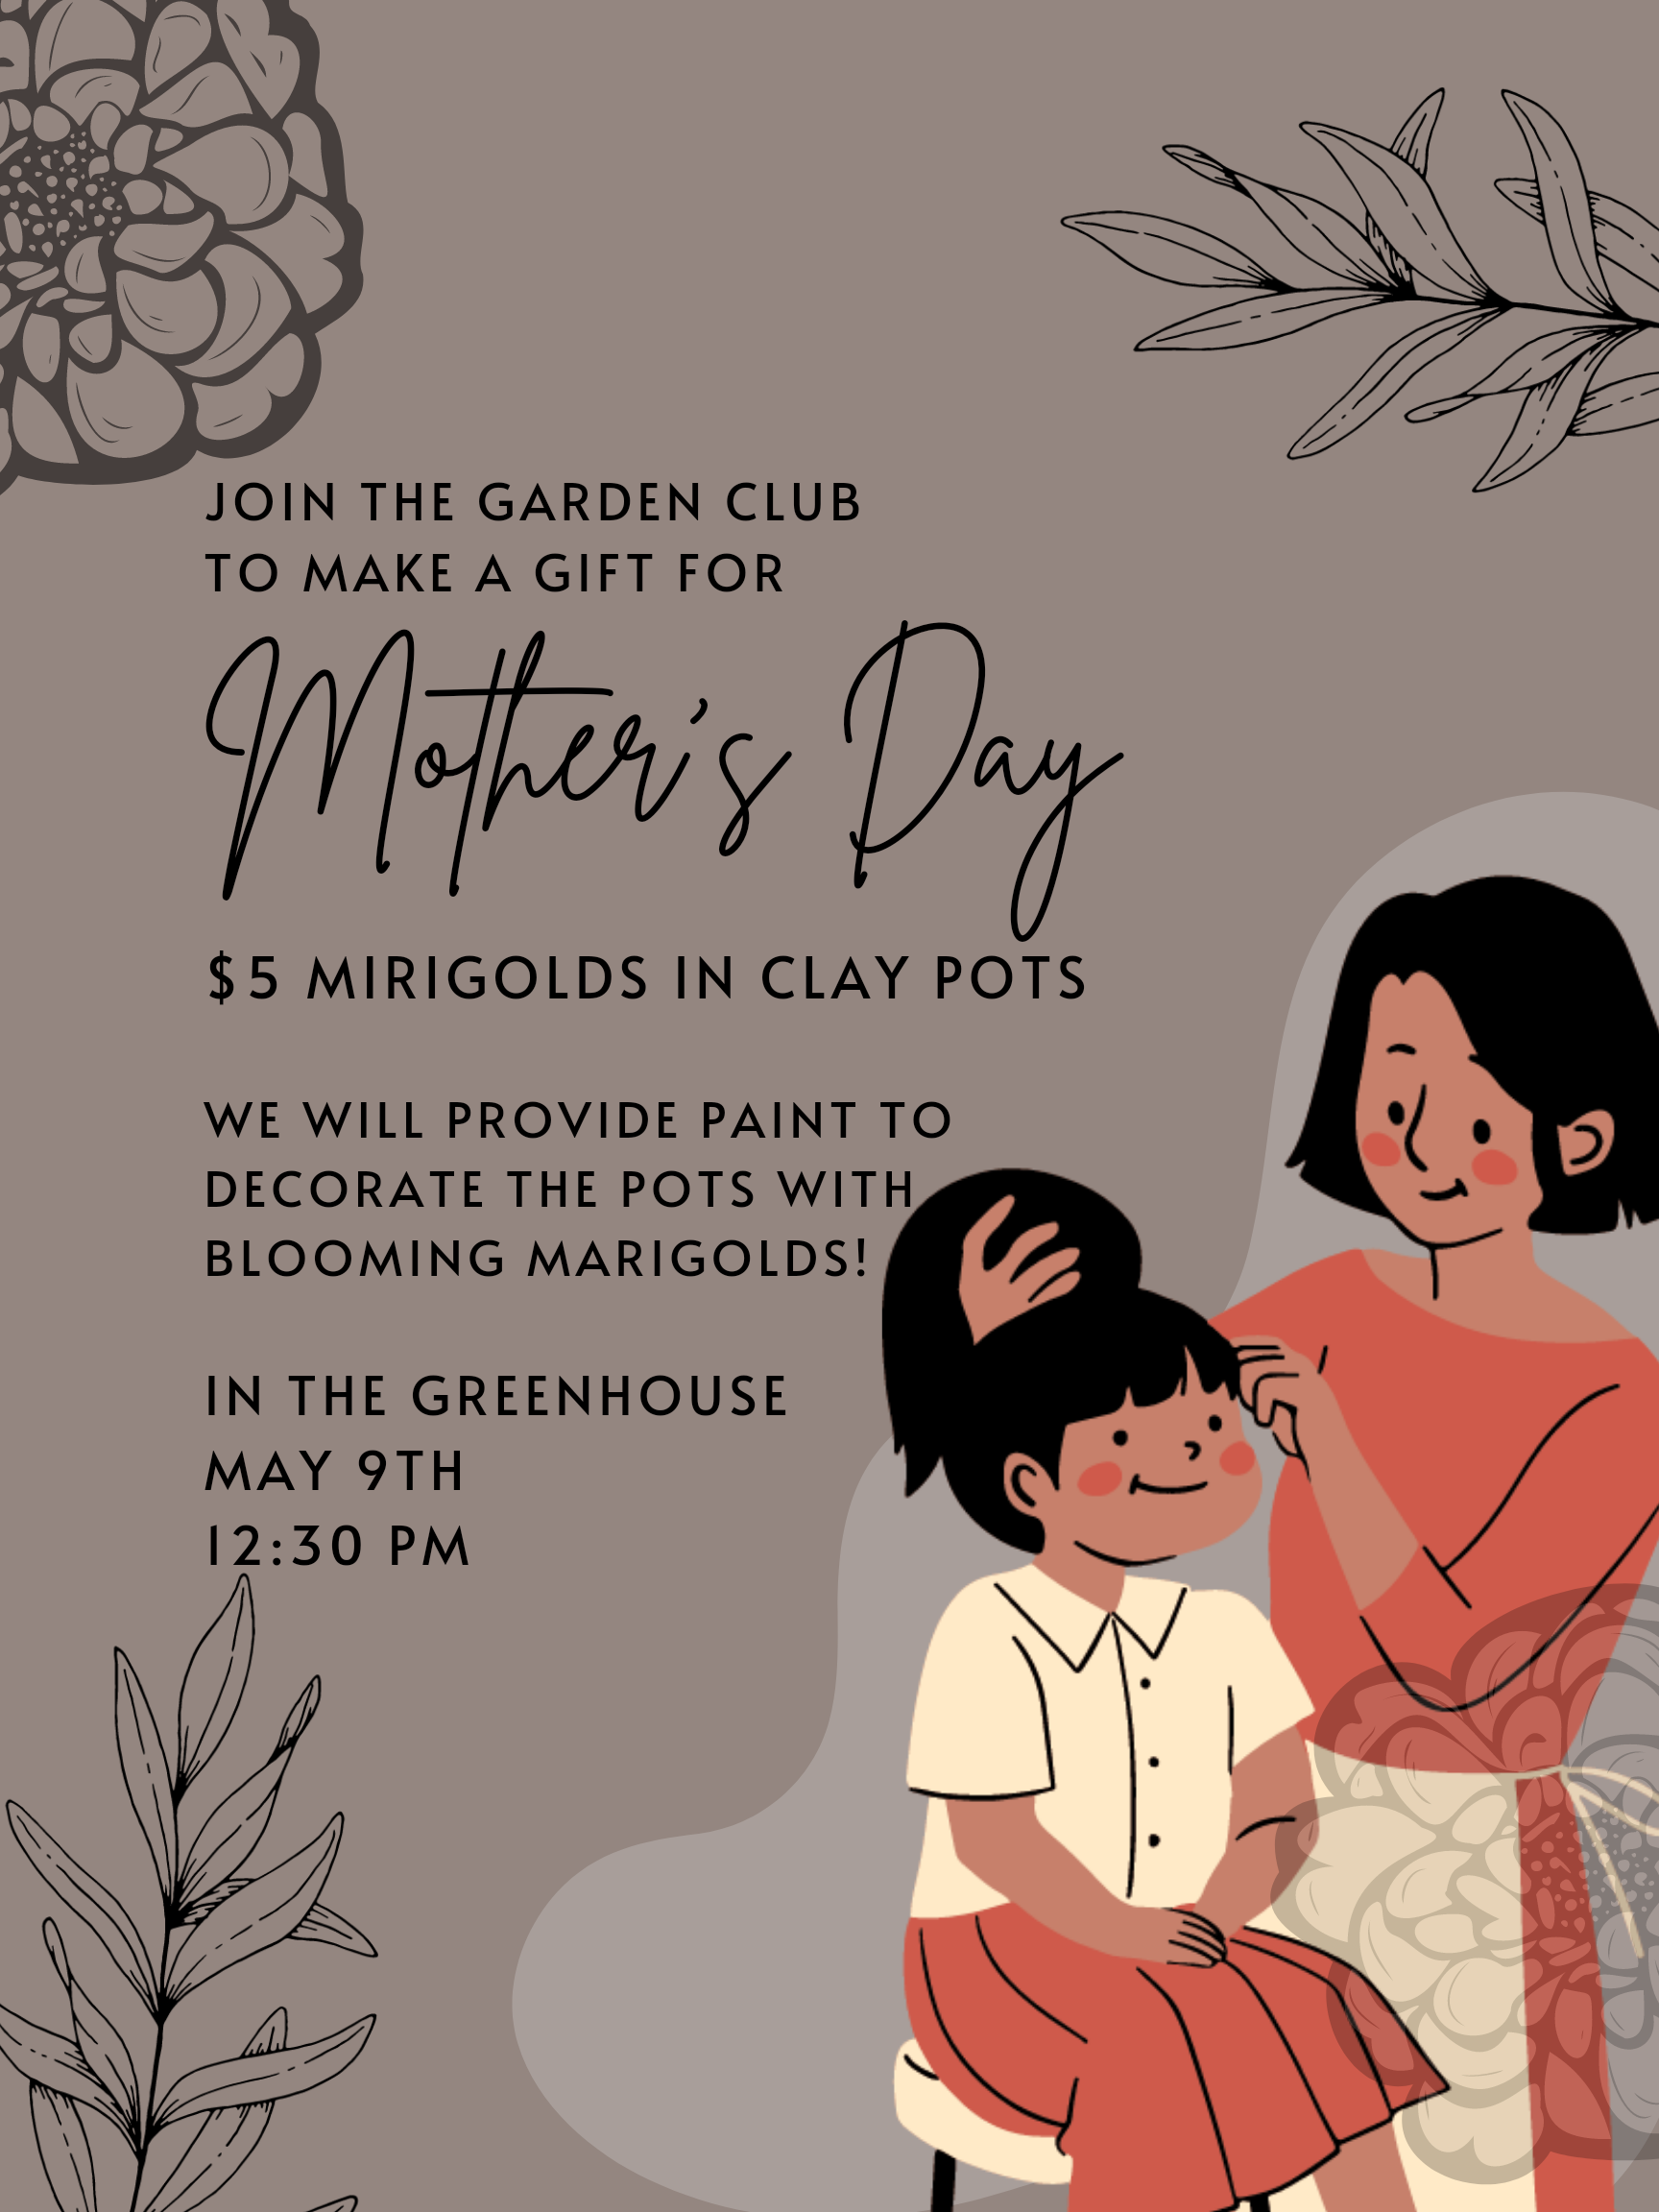 Tuesday, May 9th at 12:30pm in the Greenhouse we will be charging only $5 (cash only) to come paint a pot and plant a marigold to bring home!